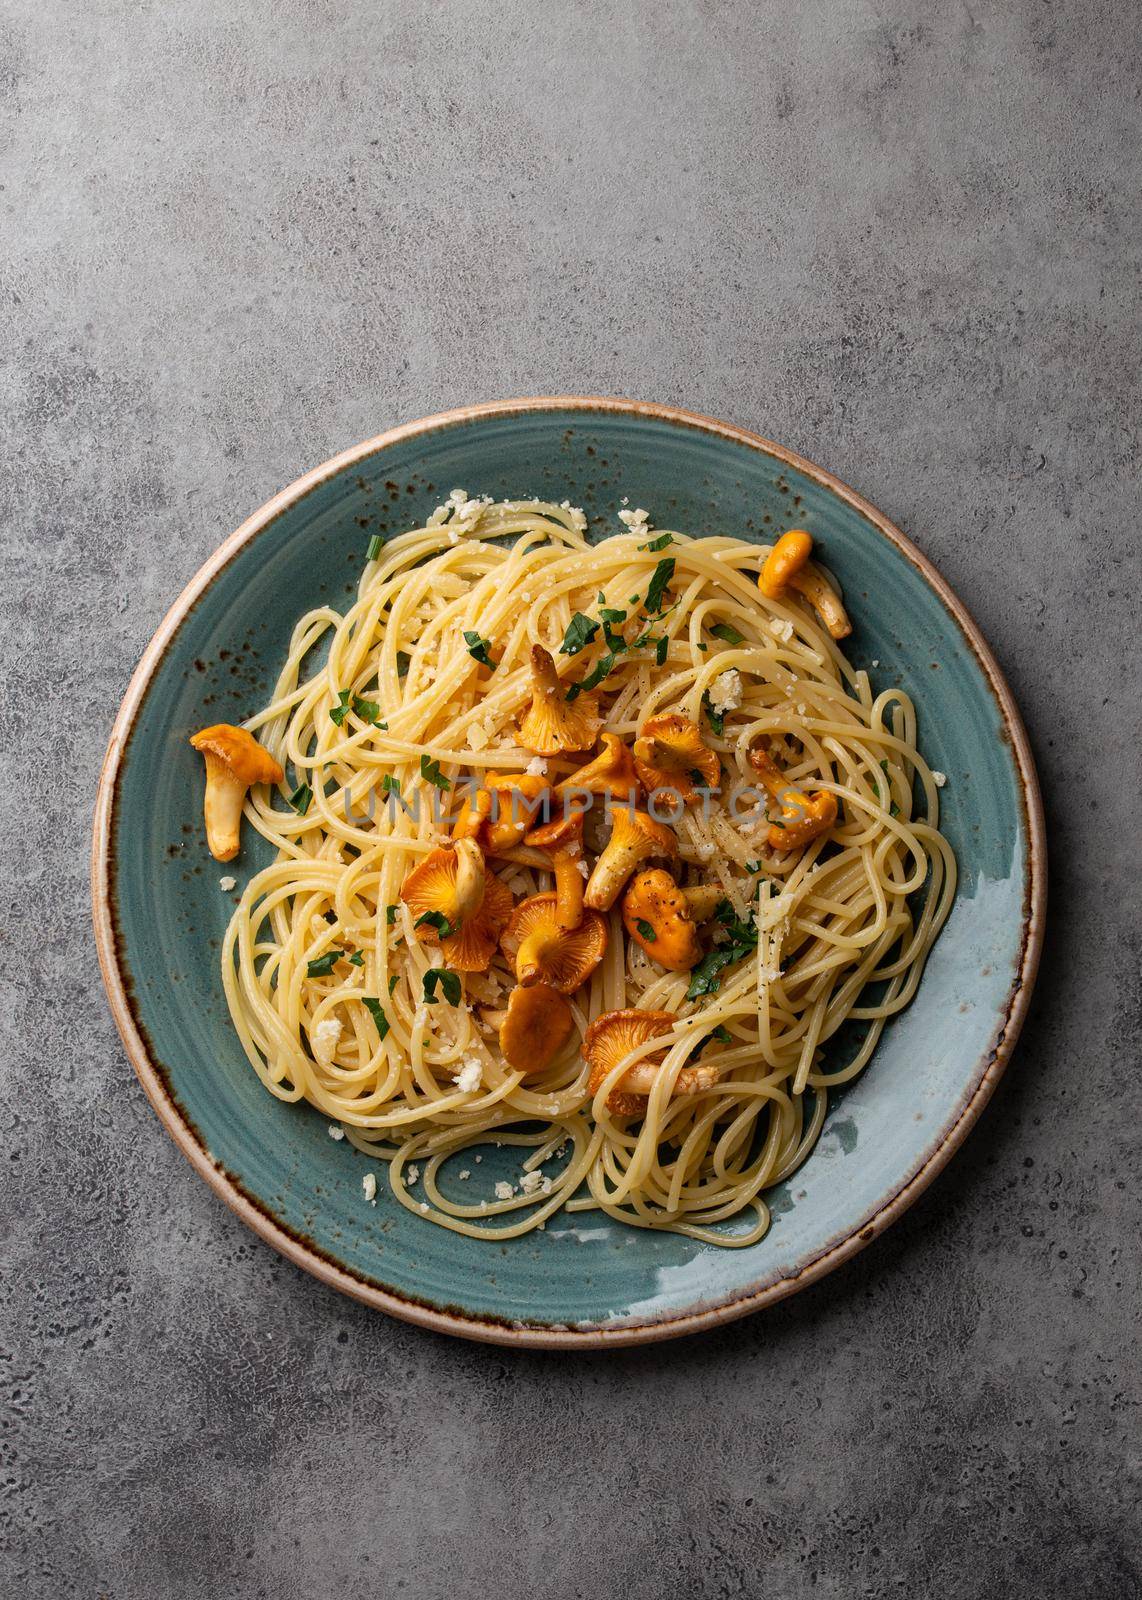 Pasta spaghetti with wild forest mushrooms chanterelles on plate. Seasonal autumn dish on rustic concrete background from above. Meal with aromatic fall chanterelles